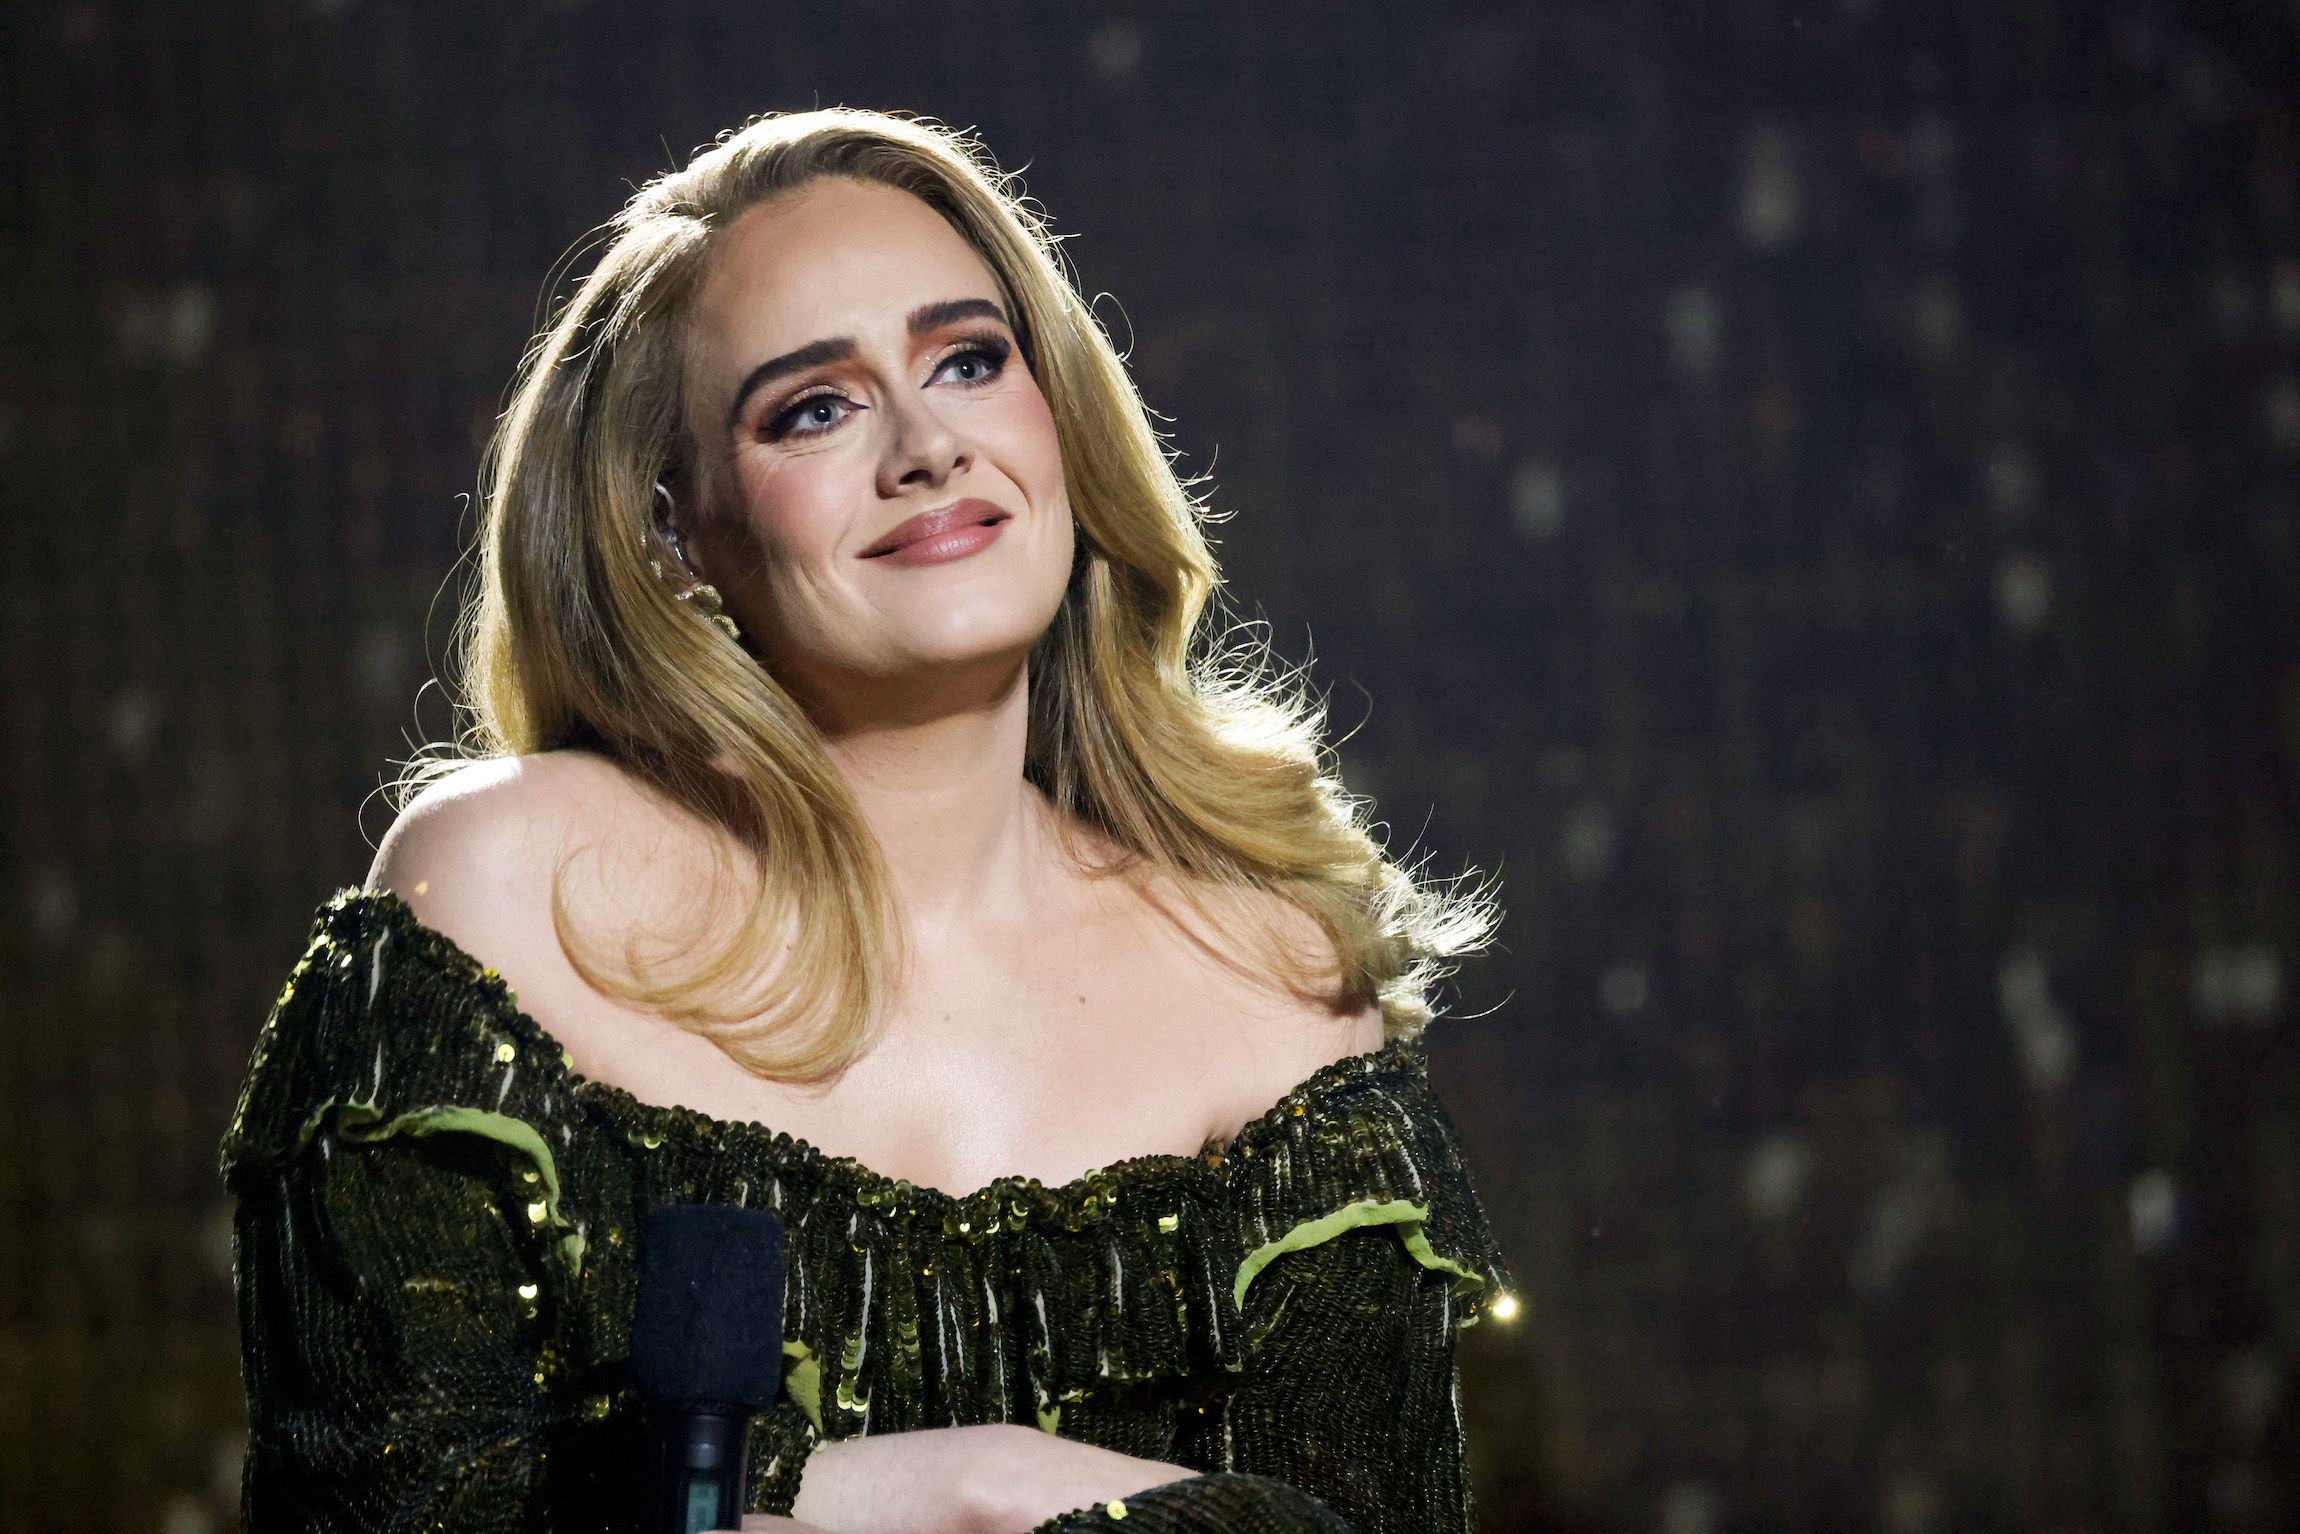 Adele Comes Out Of Hiding To Reveal New Look